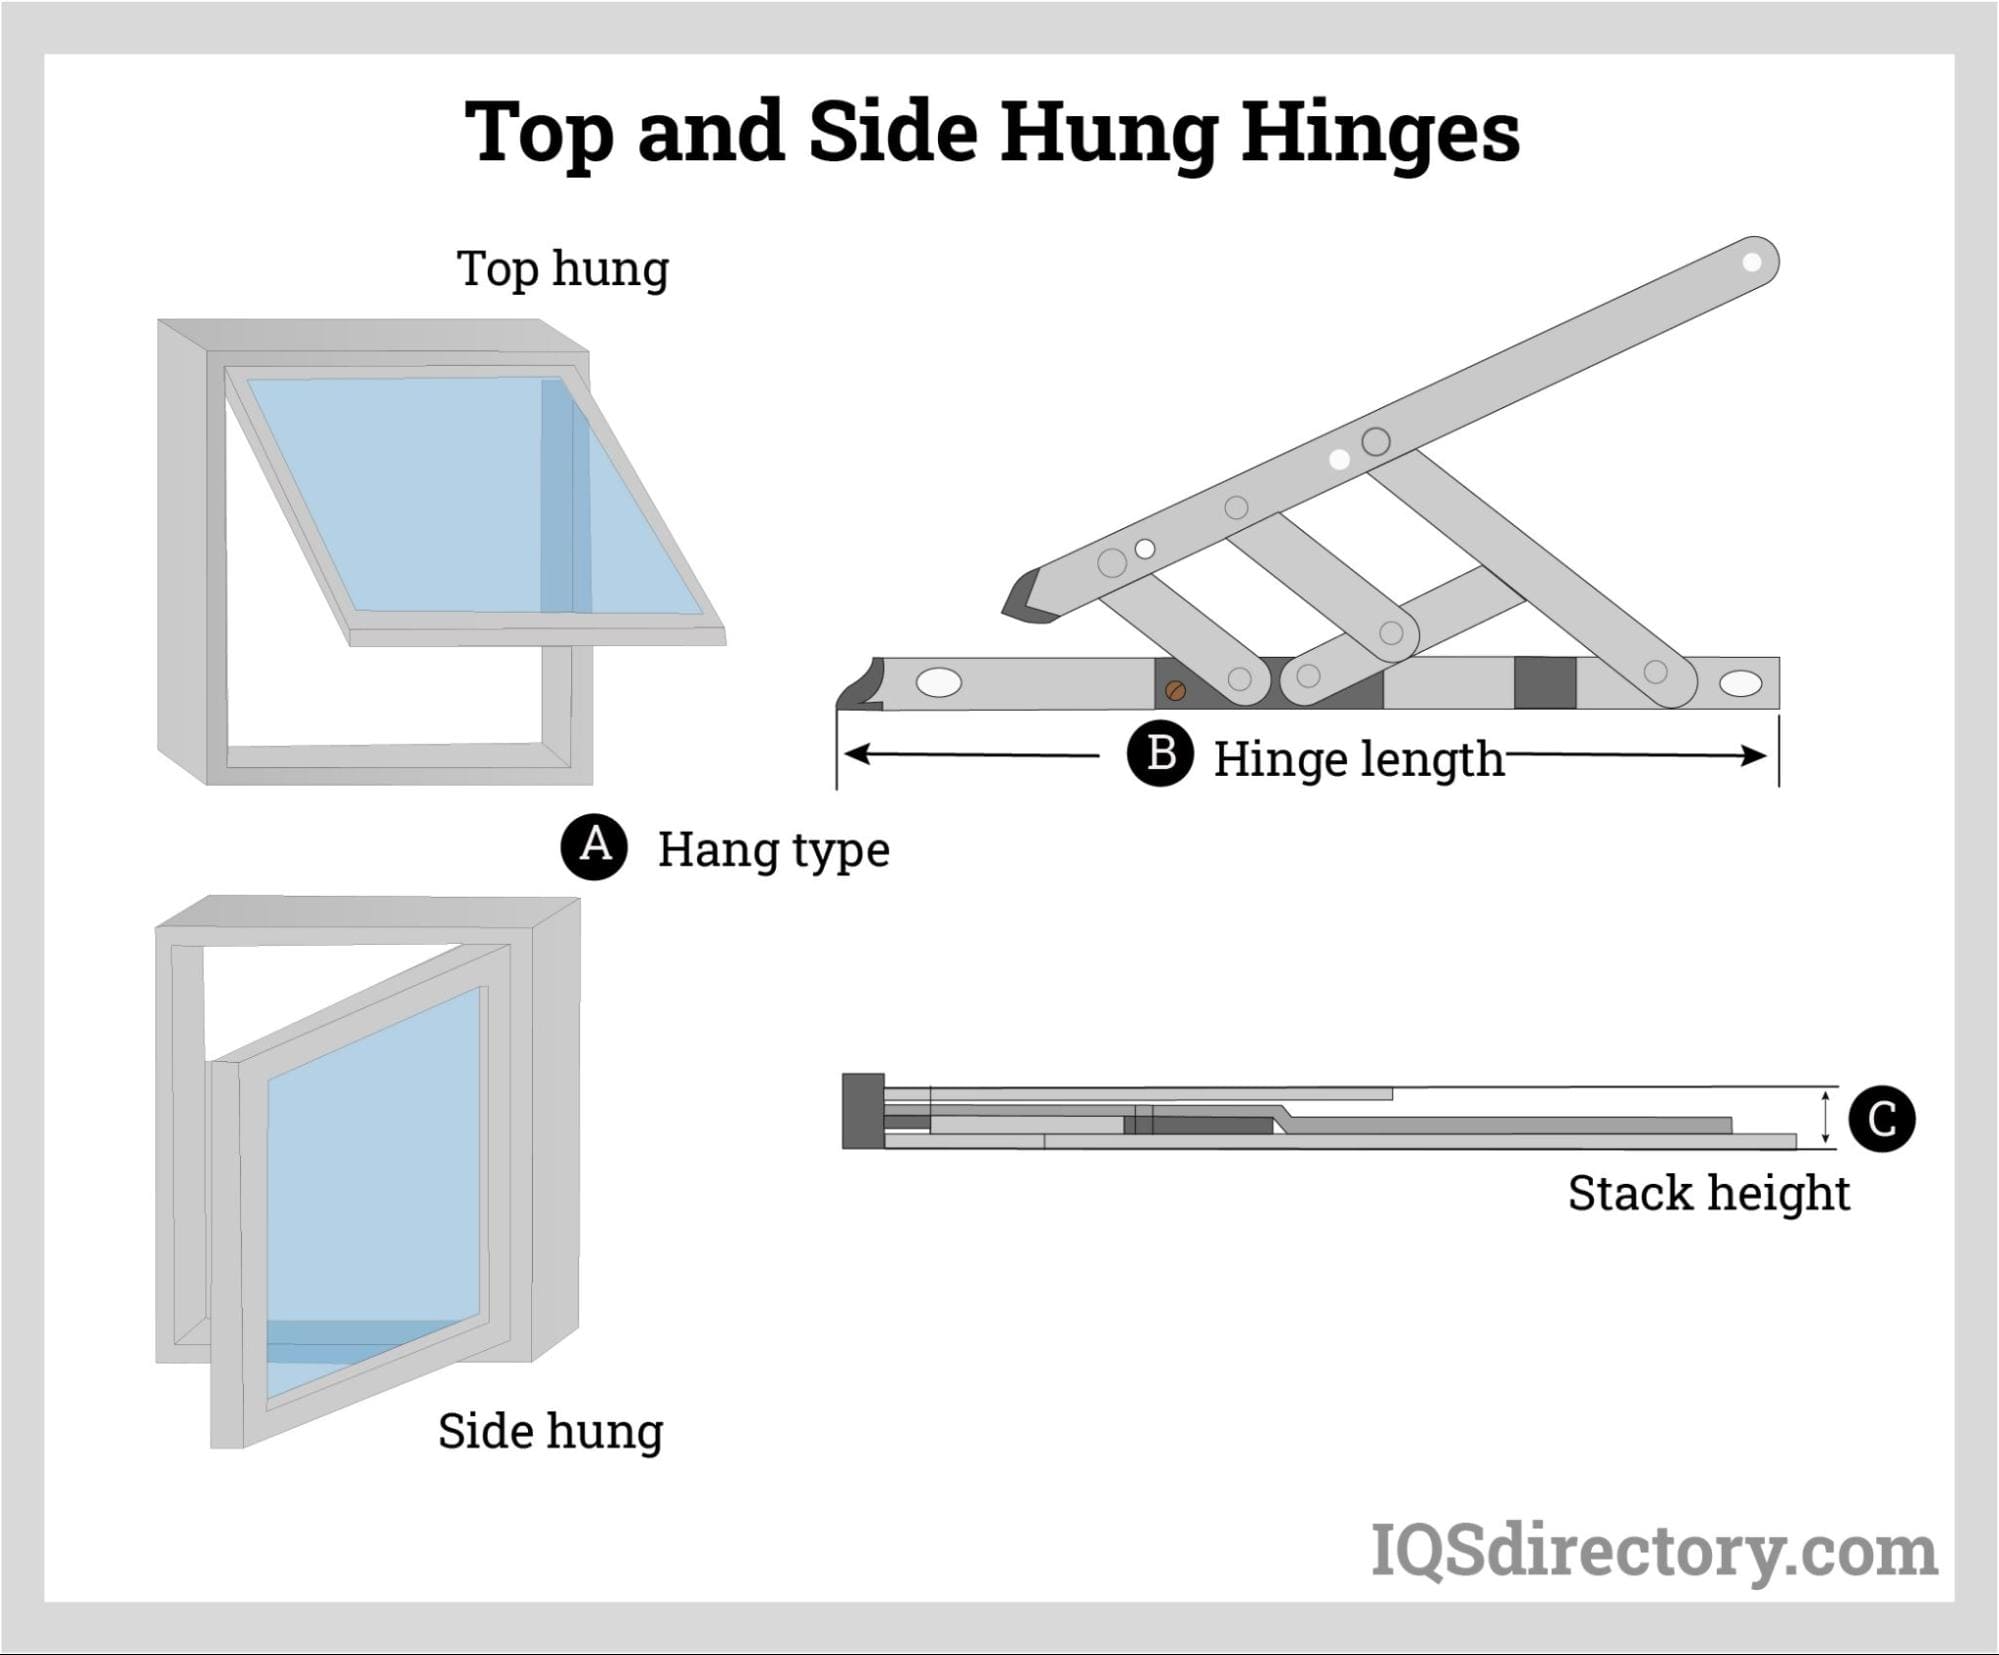 Top and Side Hung Hinges